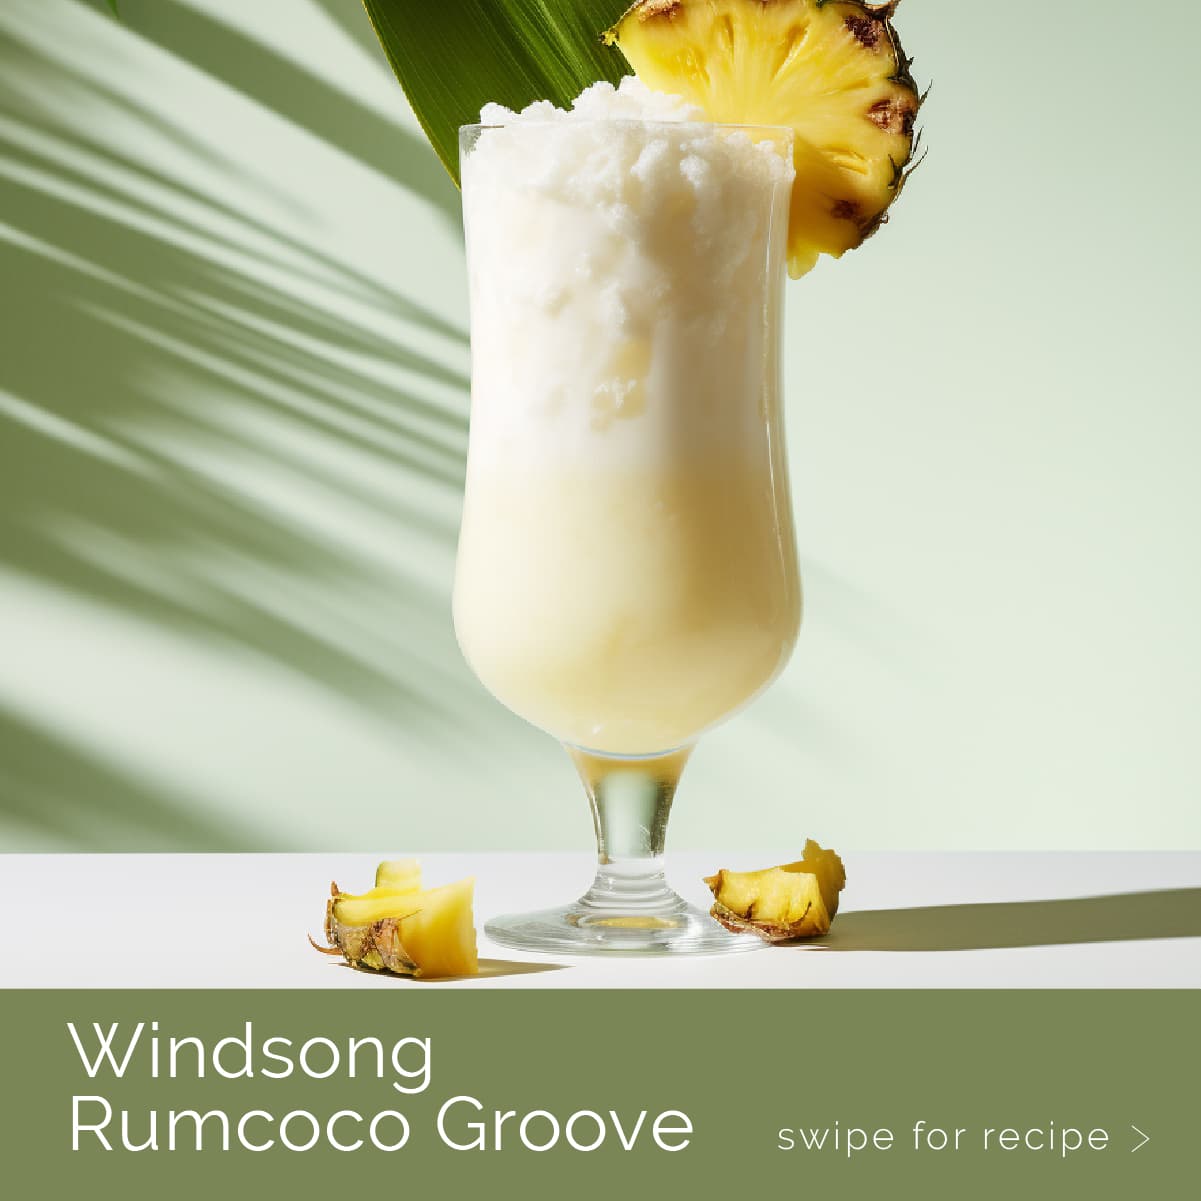 A Windsong Rumcoco Groove cocktail